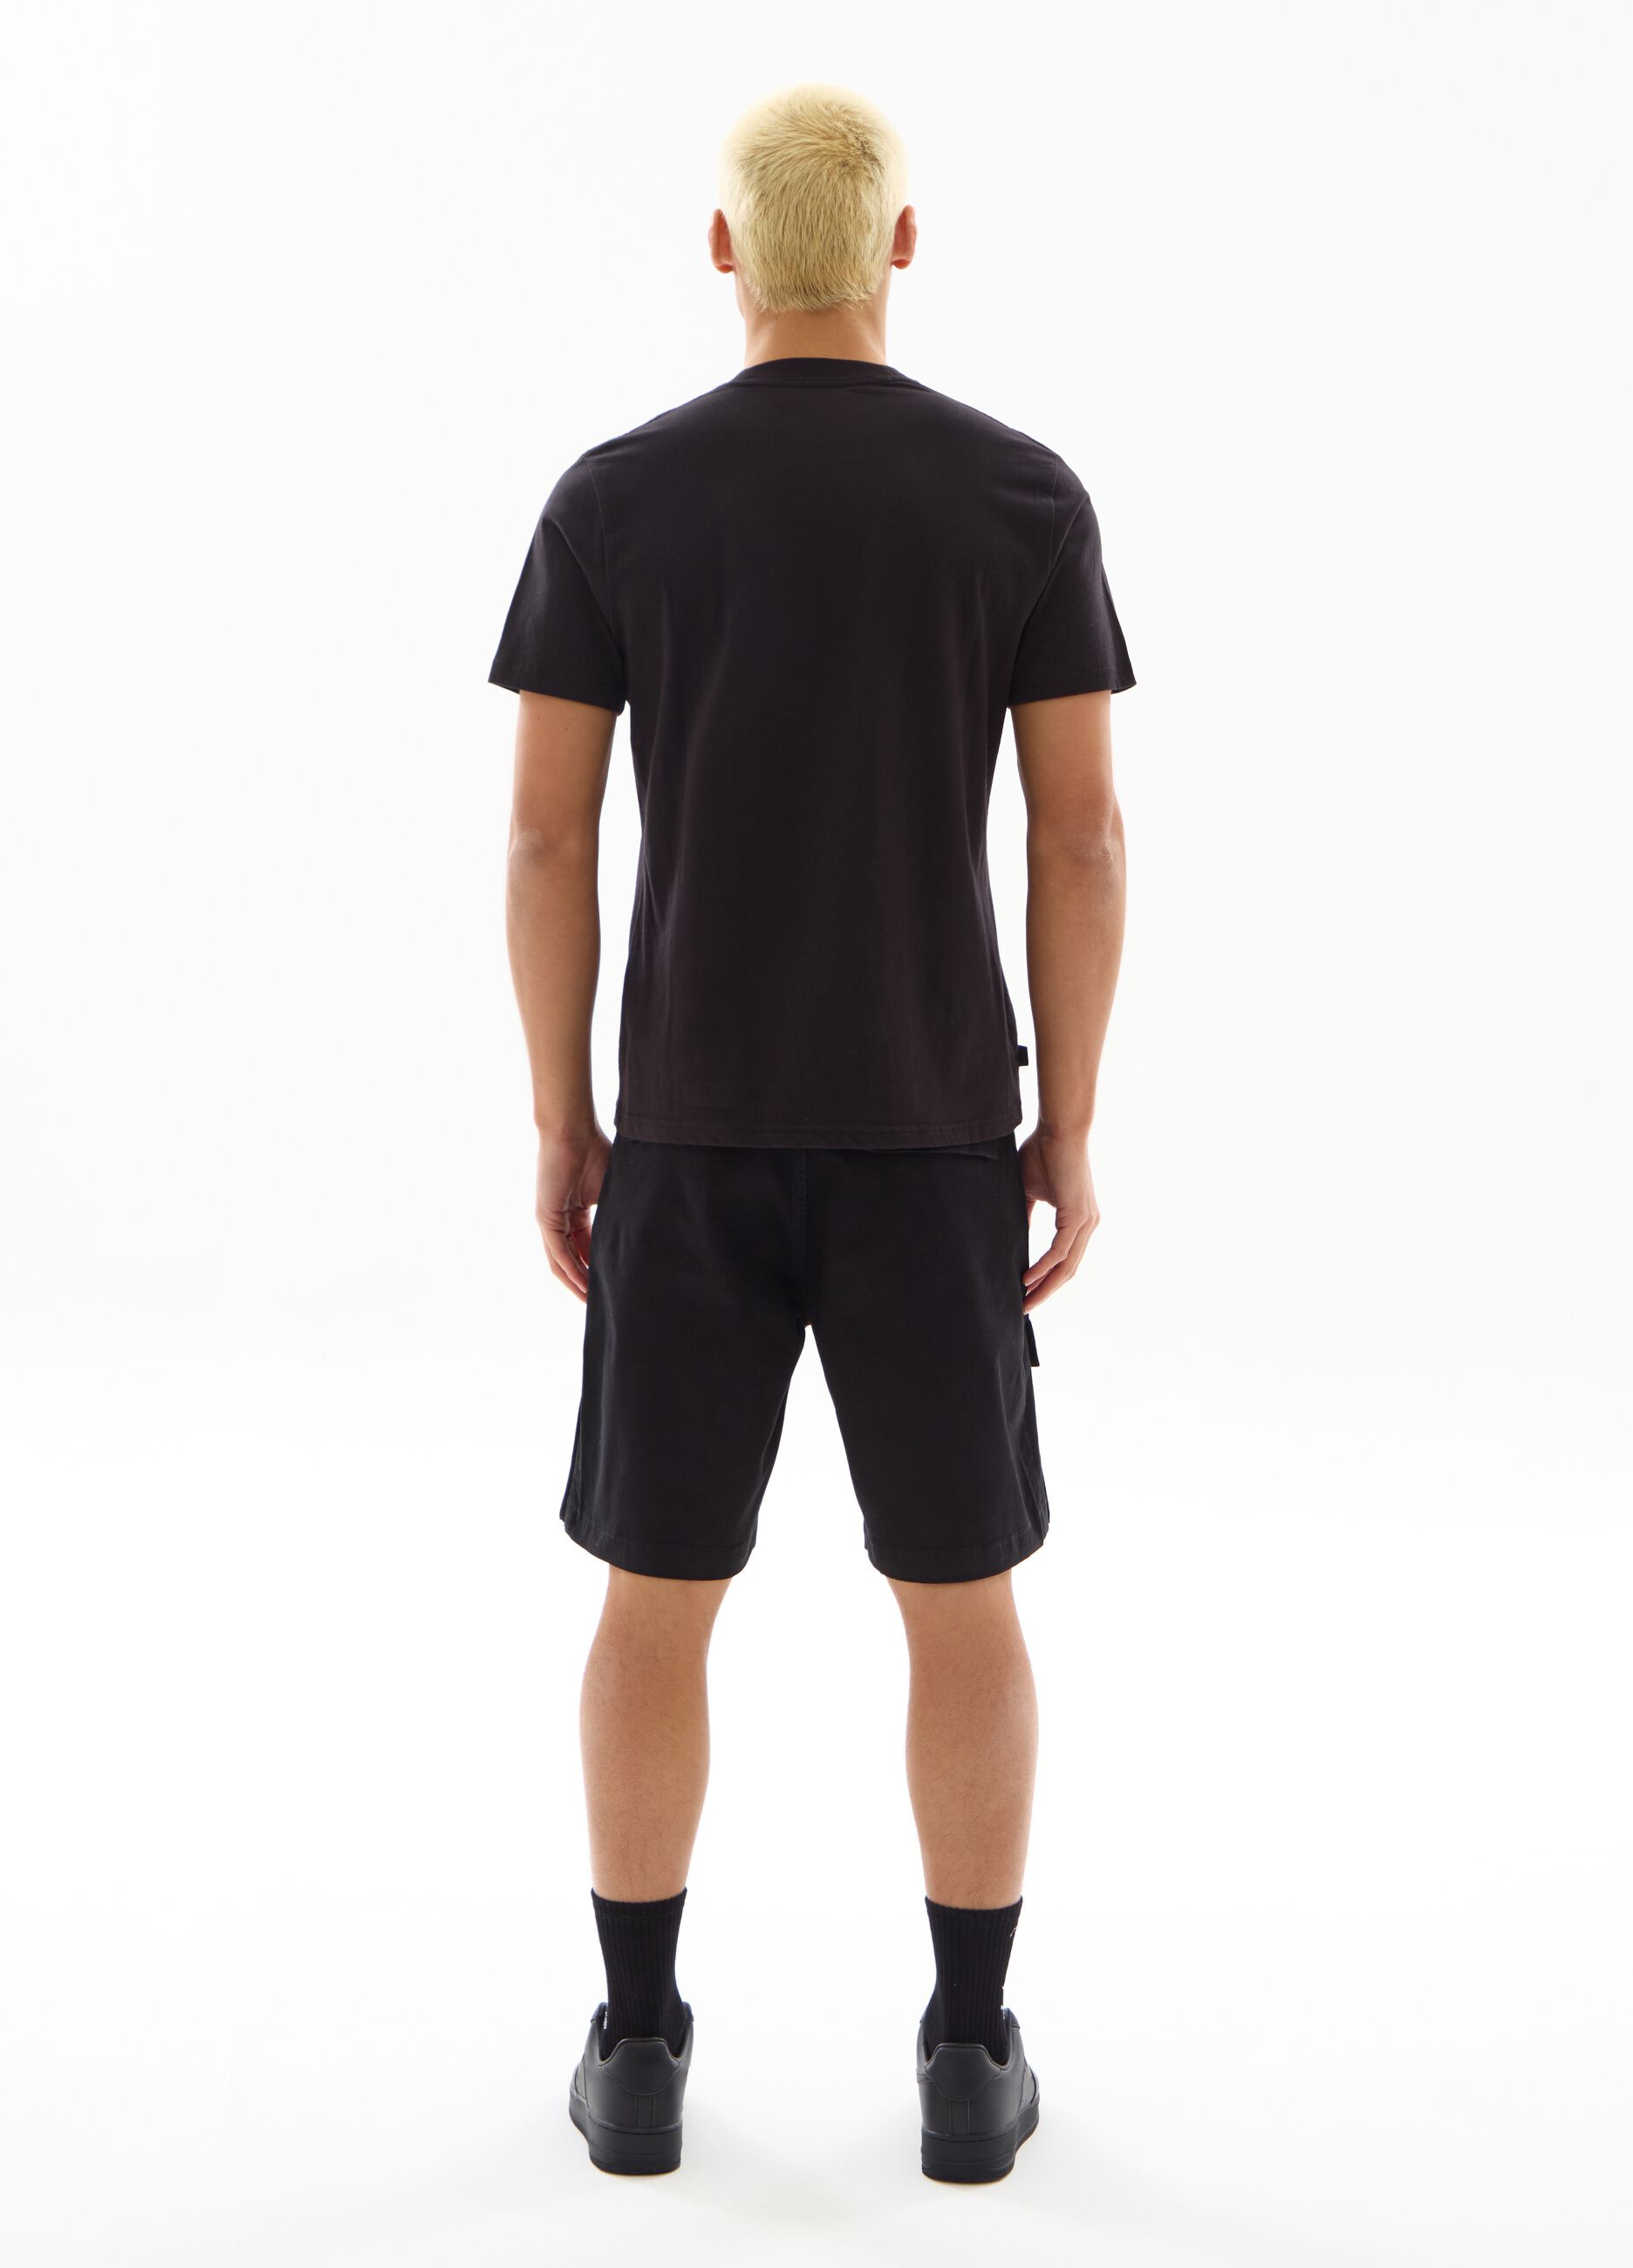 UTOPJA FOR THE SEA BEYOND cargo Bermuda shorts with logo embroidery